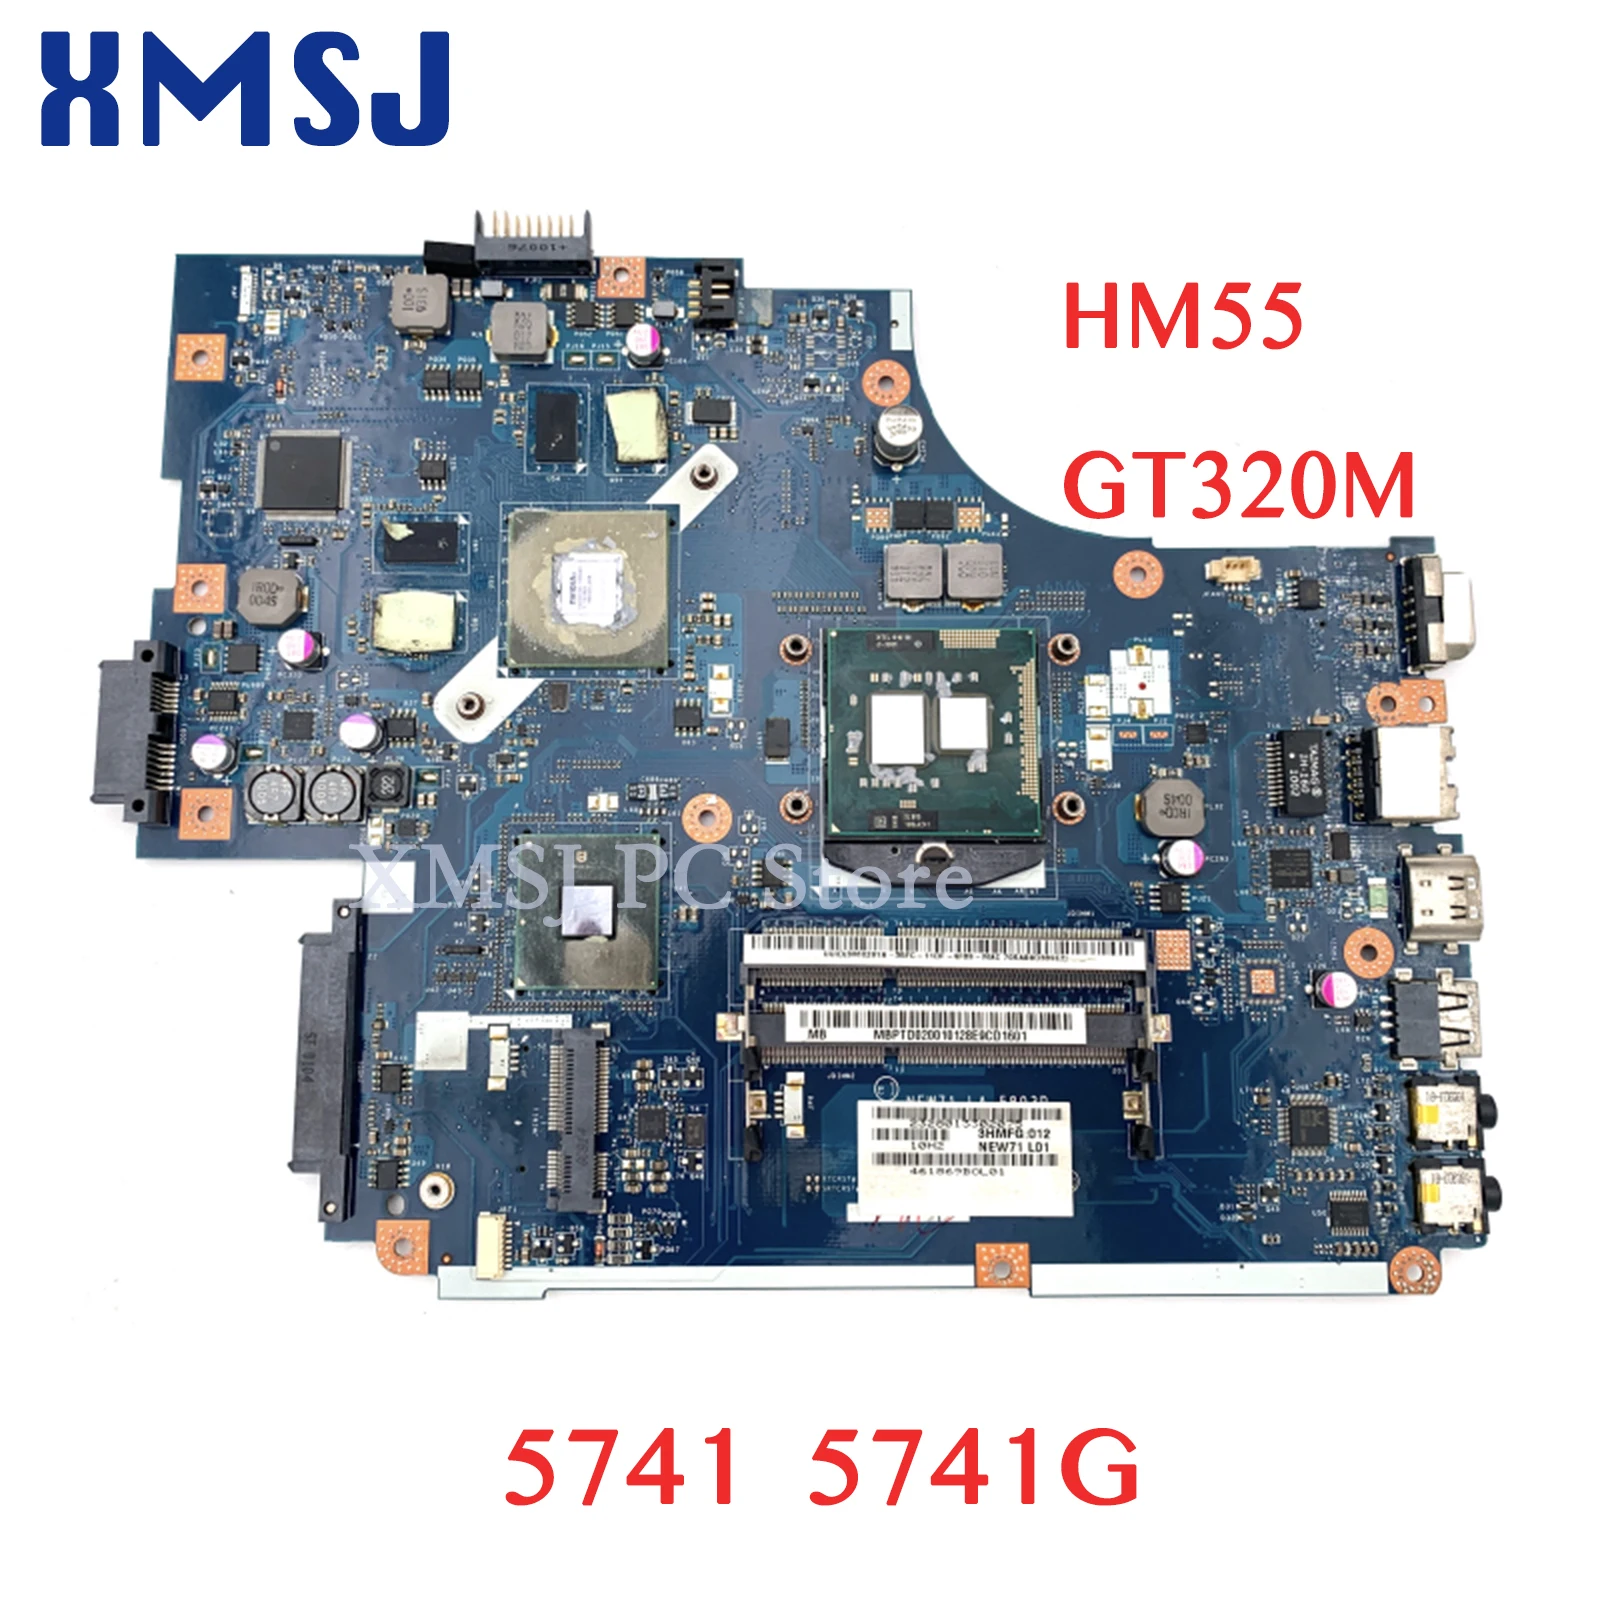 

XMSJ For ACER 5741 5741G Laptop Motherboard MBPTD02001 NEW71 LA-5893P HM55 GT320M 1GB DDR3 Free CPU Main Board Full Test